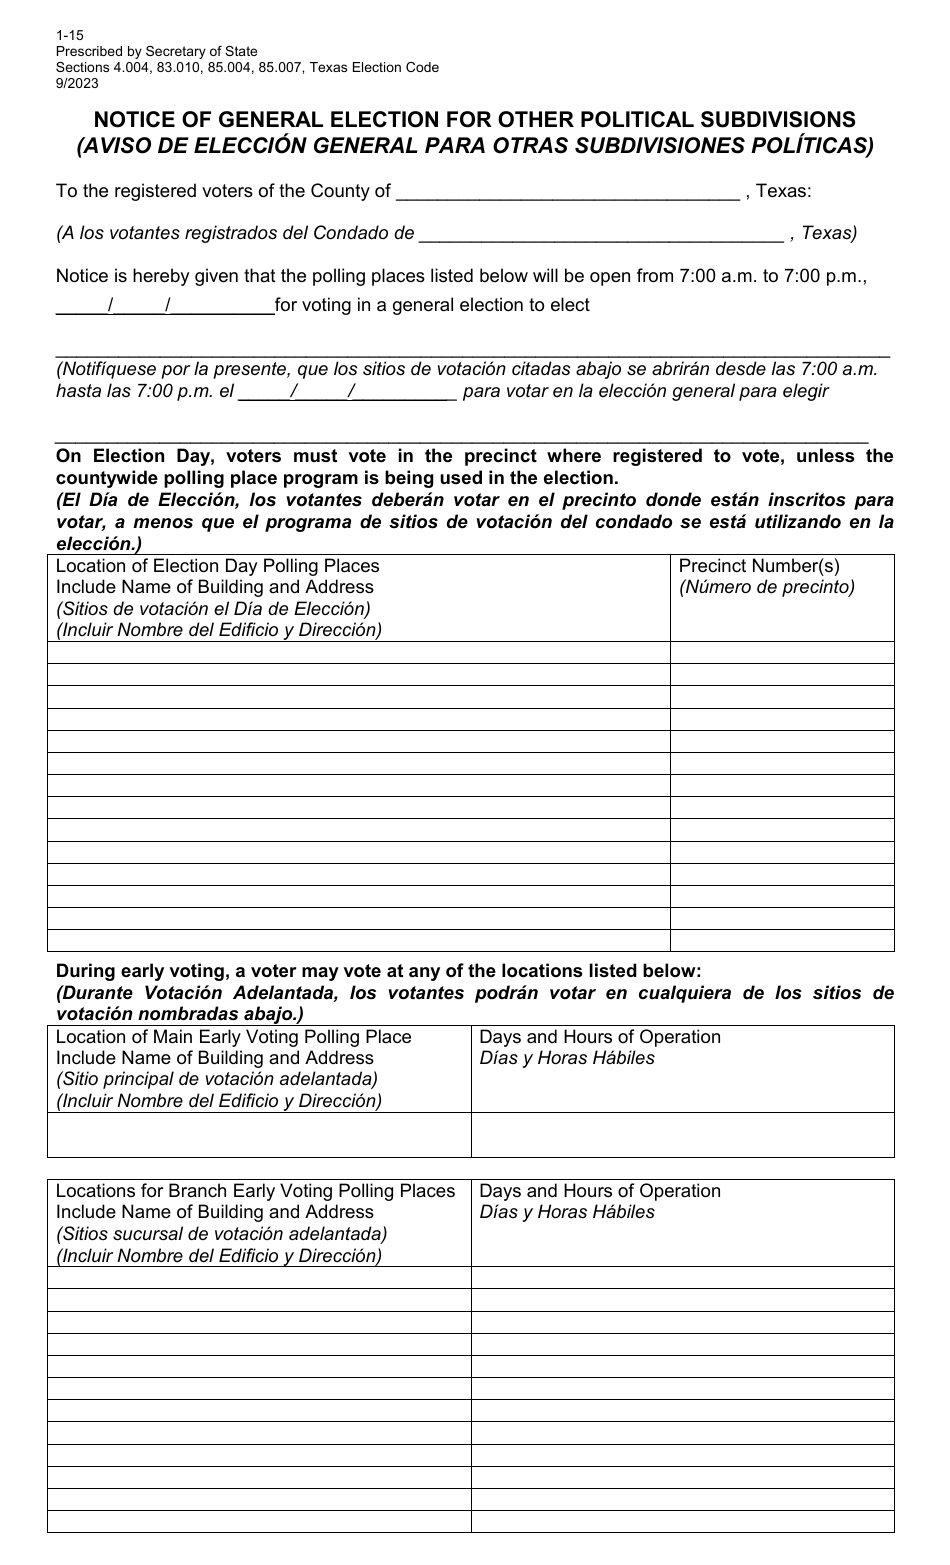 Form 1-15 Notice of General Election for Other Political Subdivision - Texas (English / Spanish), Page 1